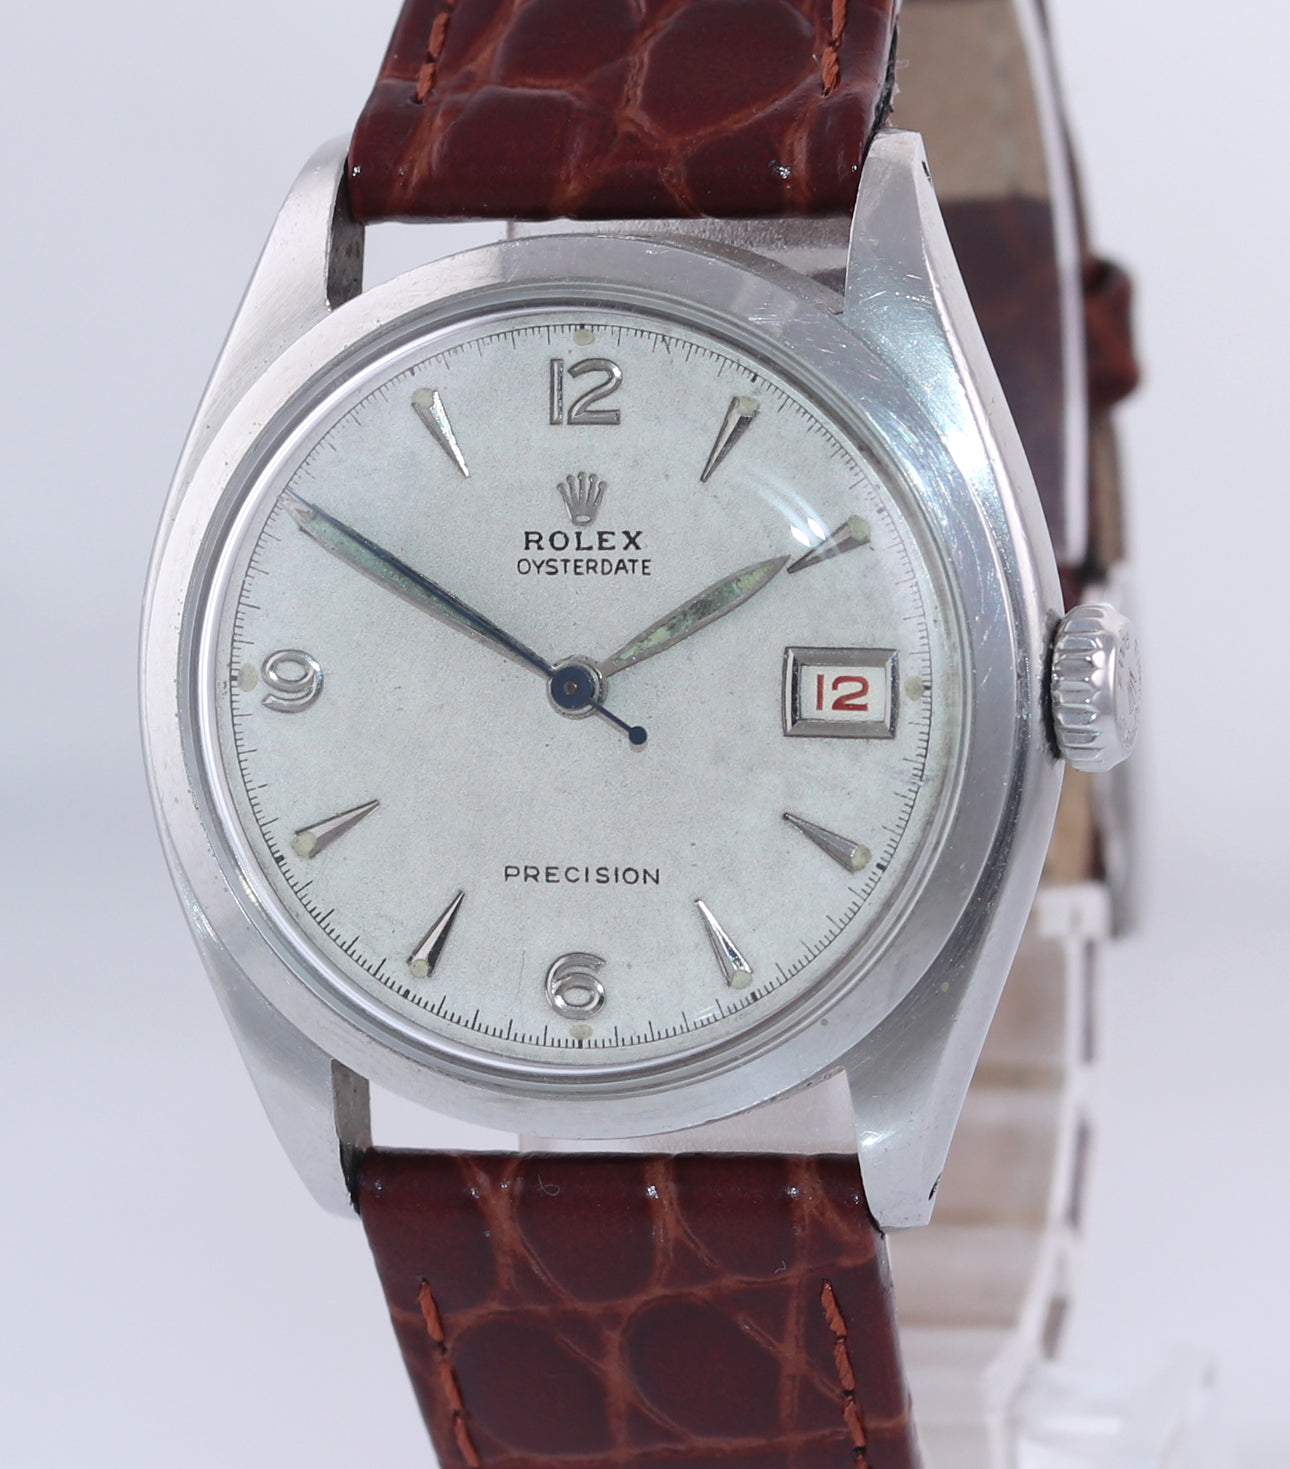 VTG 1962 Rolex Oysterdate Precision Stainless Steel Swiss Manual Watch 6094